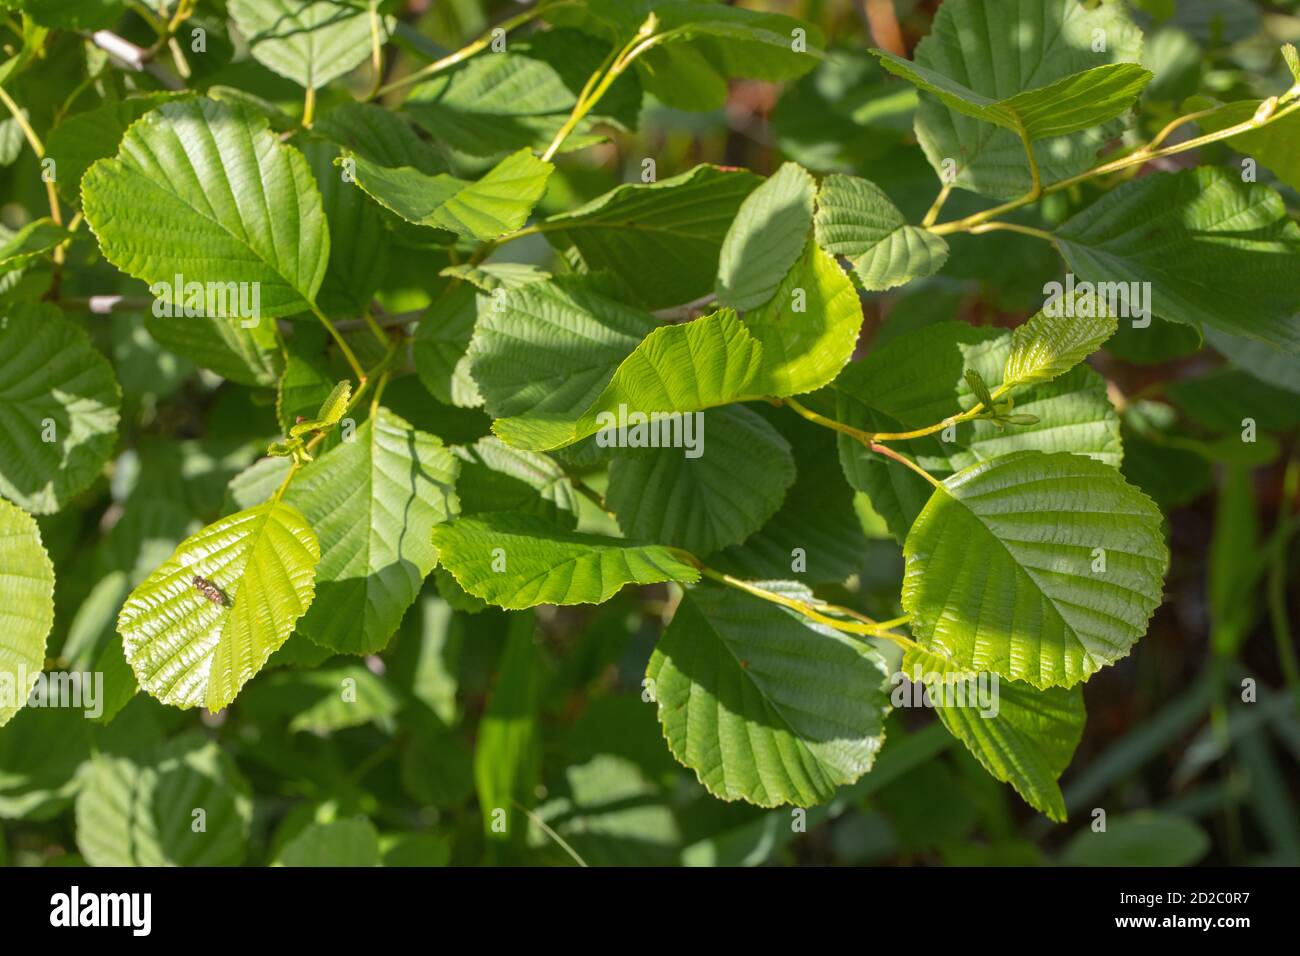 Alder (Alnus glutinosa). Spring fresh, leaves on young shoots or short stems. Colour, the outline shape, helps identification of this tree species. Stock Photo